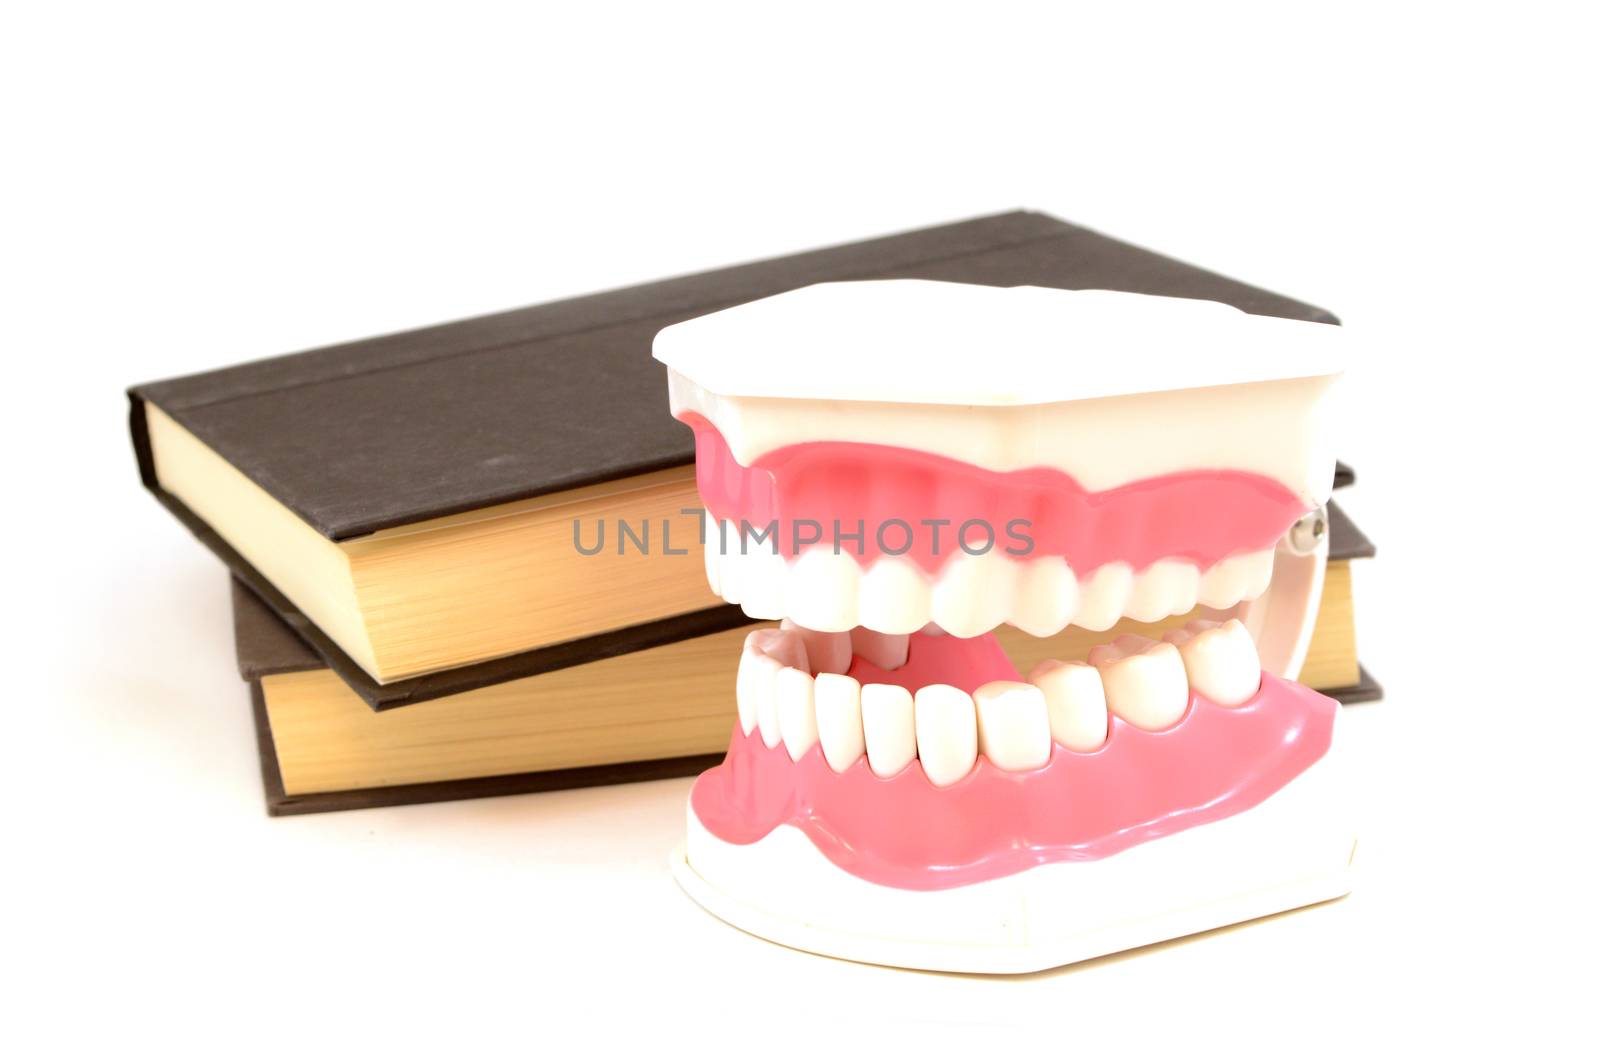 Education On Oral Health by AlphaBaby